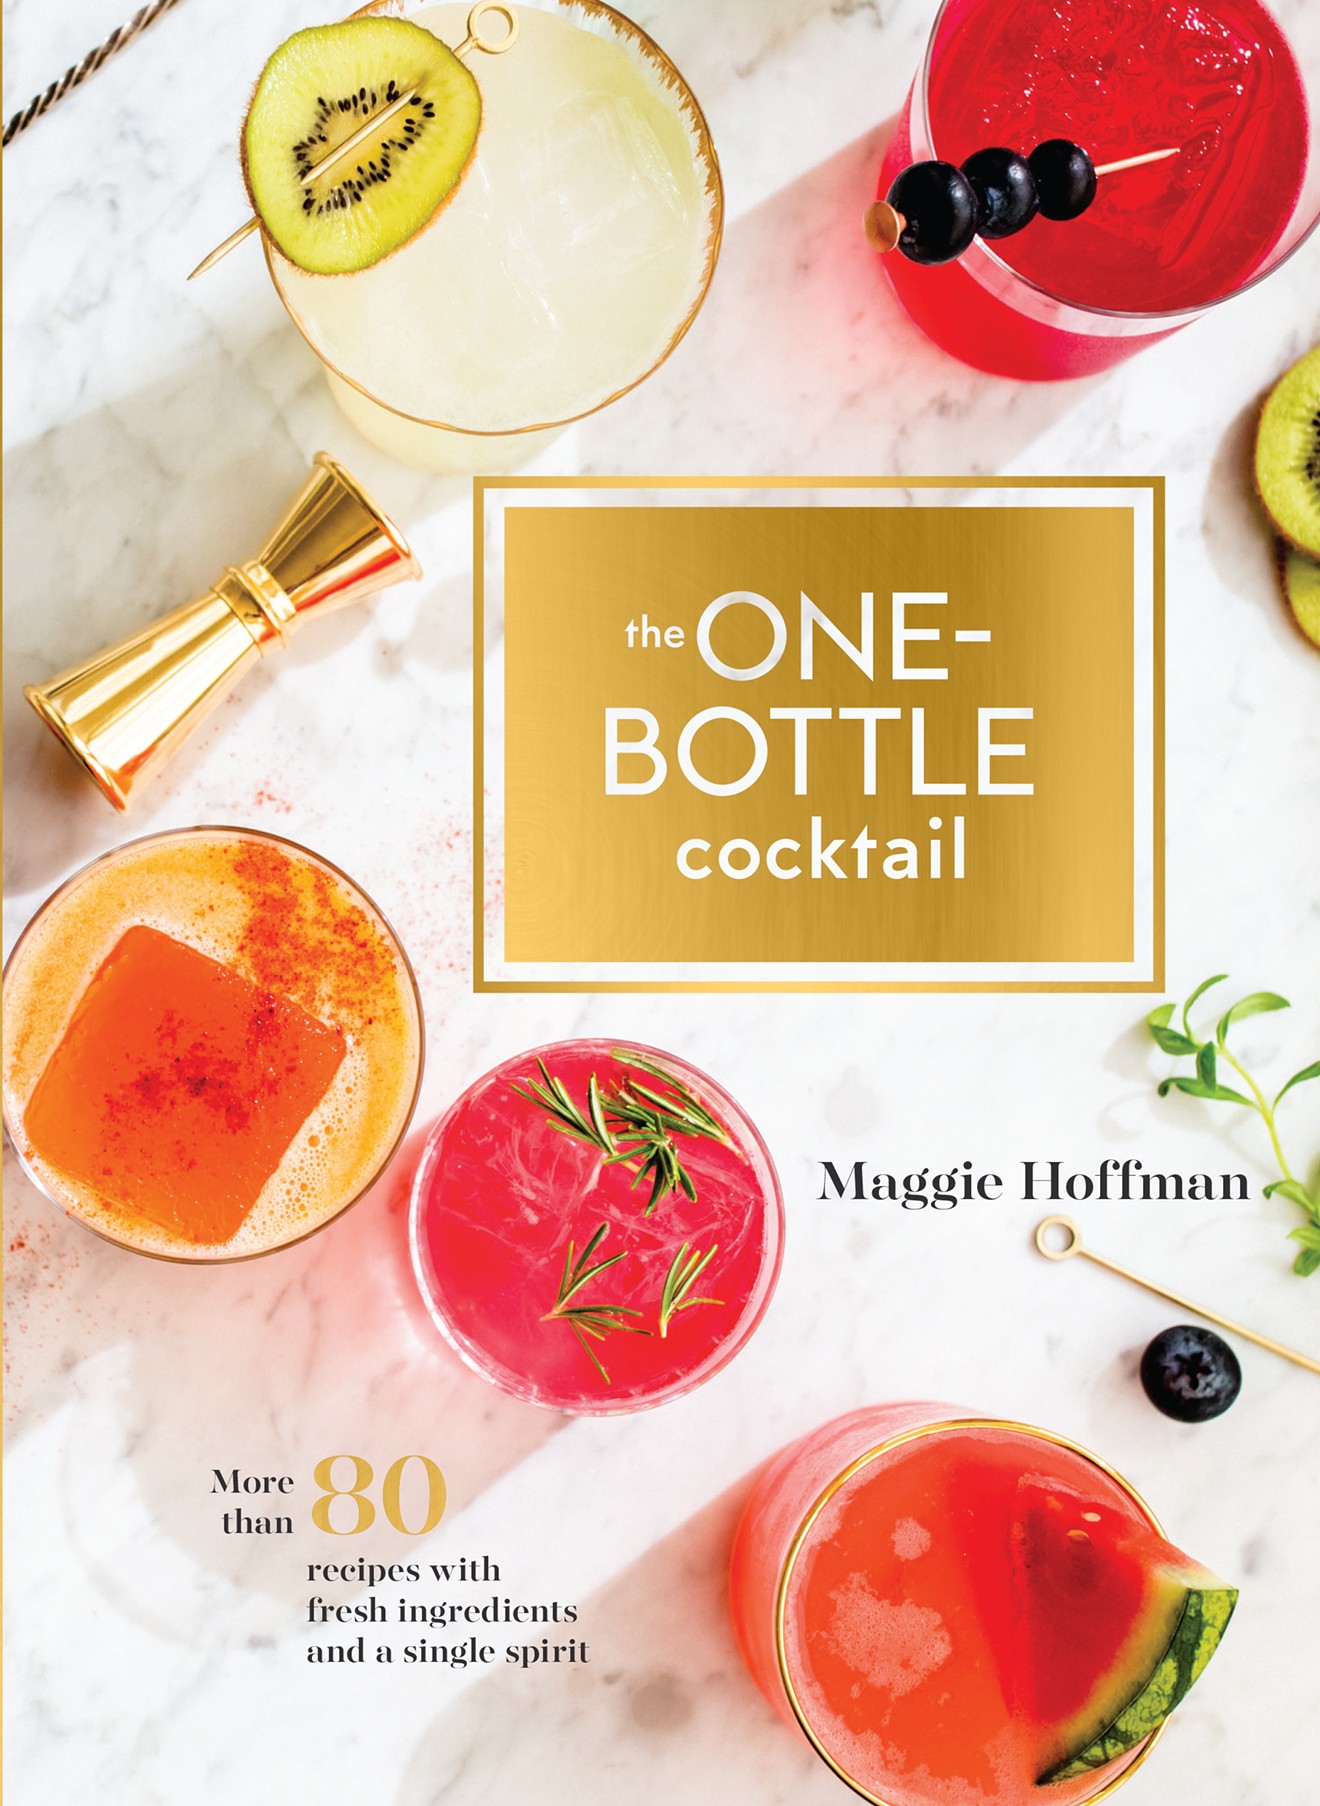 The One-Bottle Cocktail, a new book by Maggie Hoffman